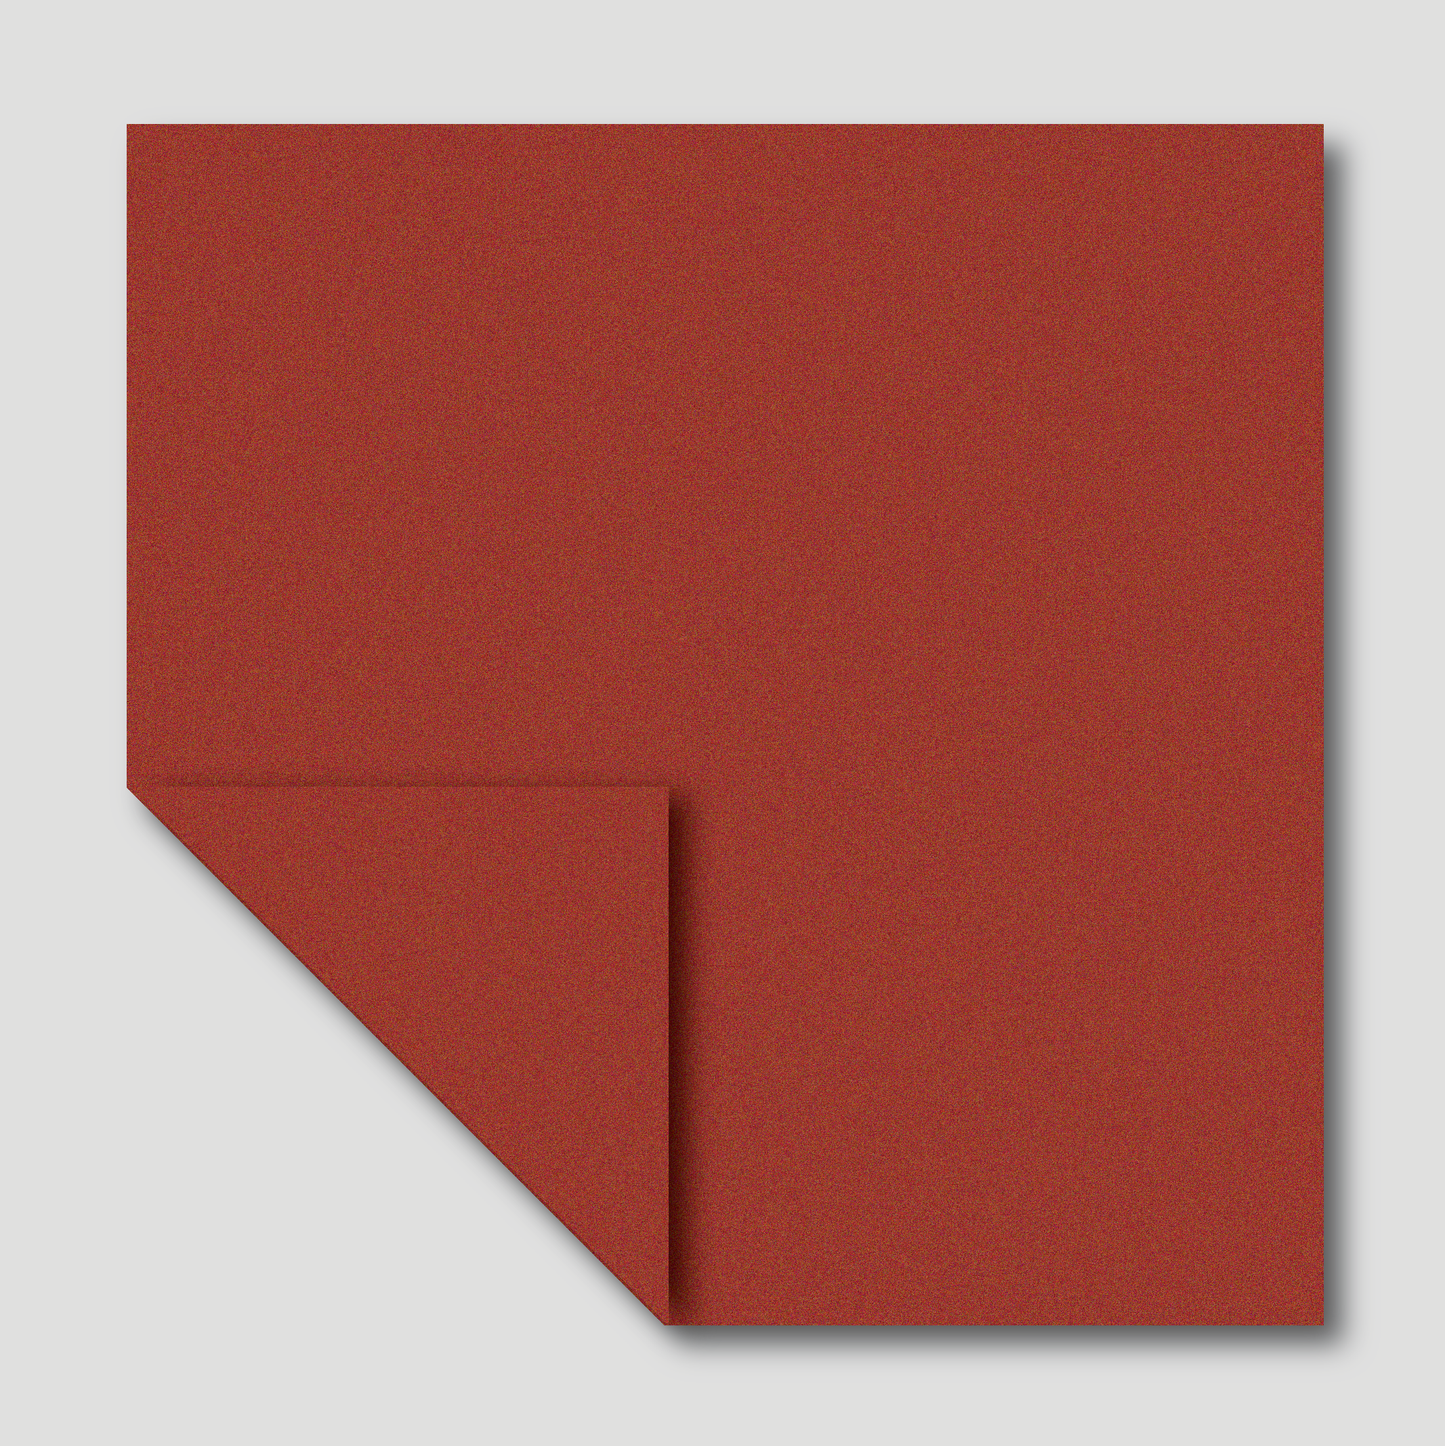 [Taro's Origami Studio] Biotope Jumbo 13.75 Inch / 35cm Single Color (Amber Red) 10 Sheets (All Same Color) Premium Japanese Paper for Advanced Folders (Made in Japan)